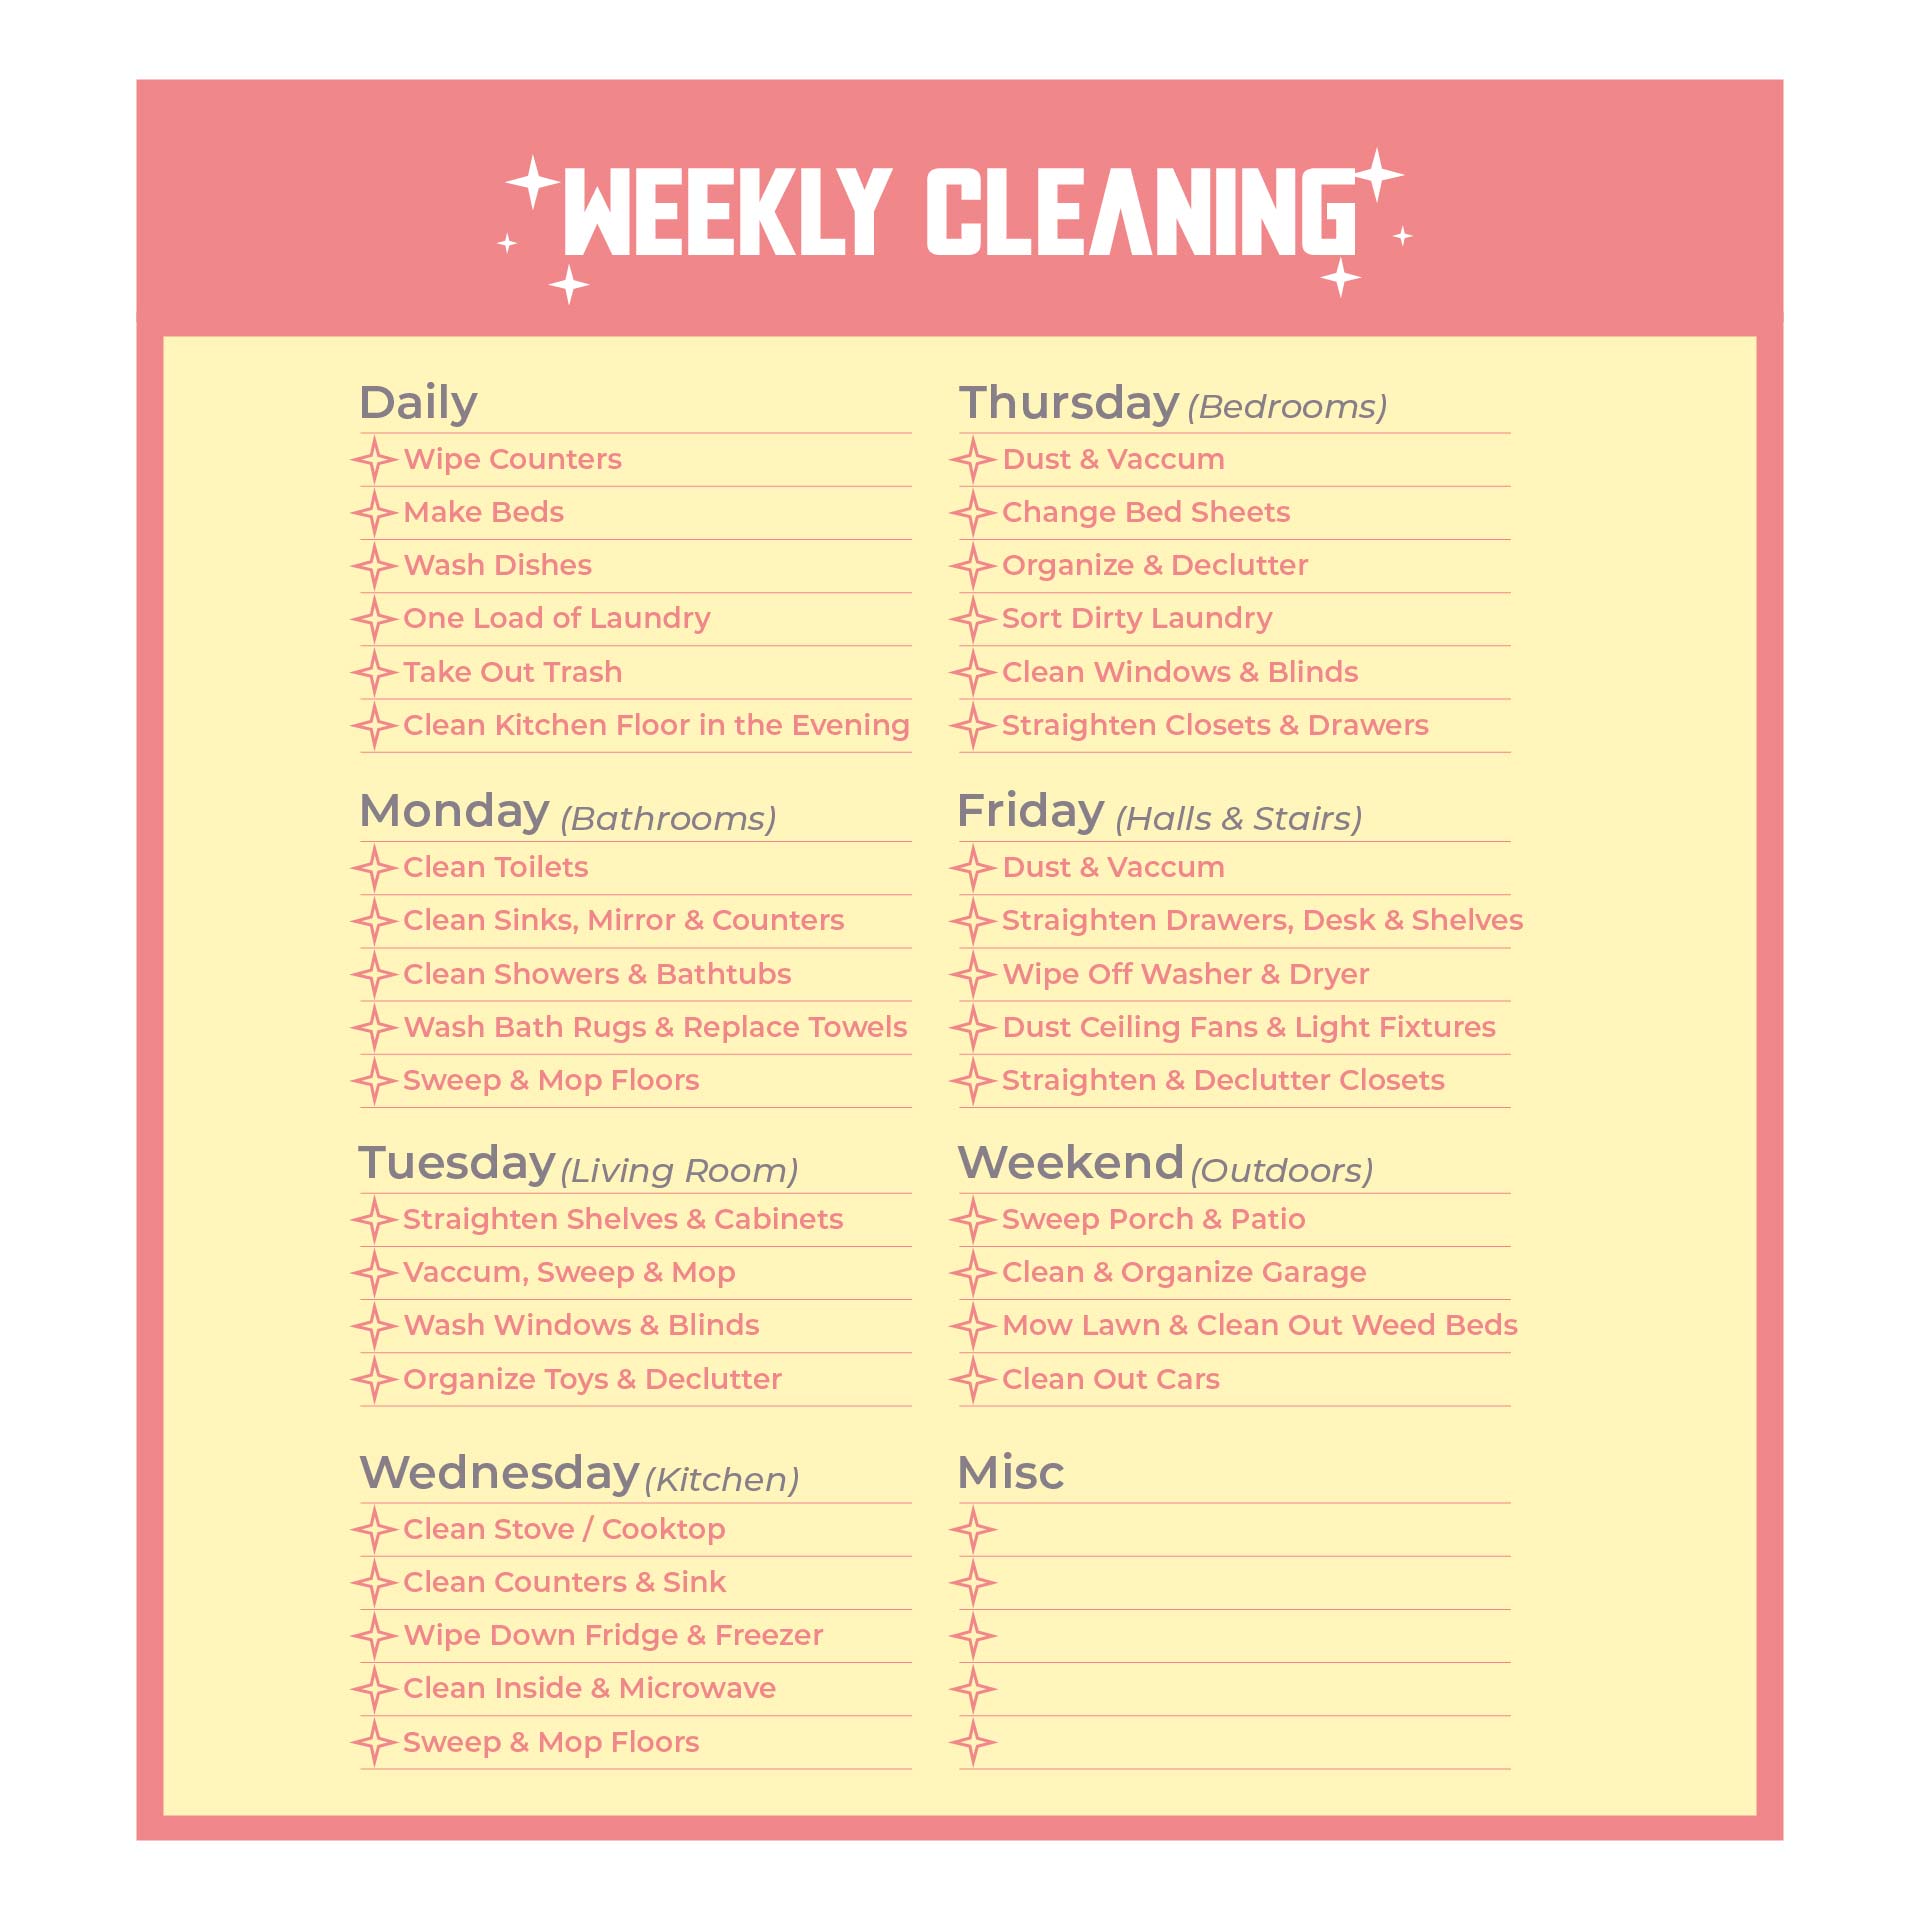 printable-cleaning-schedule-form-for-daily-weekly-cleaning-weekly